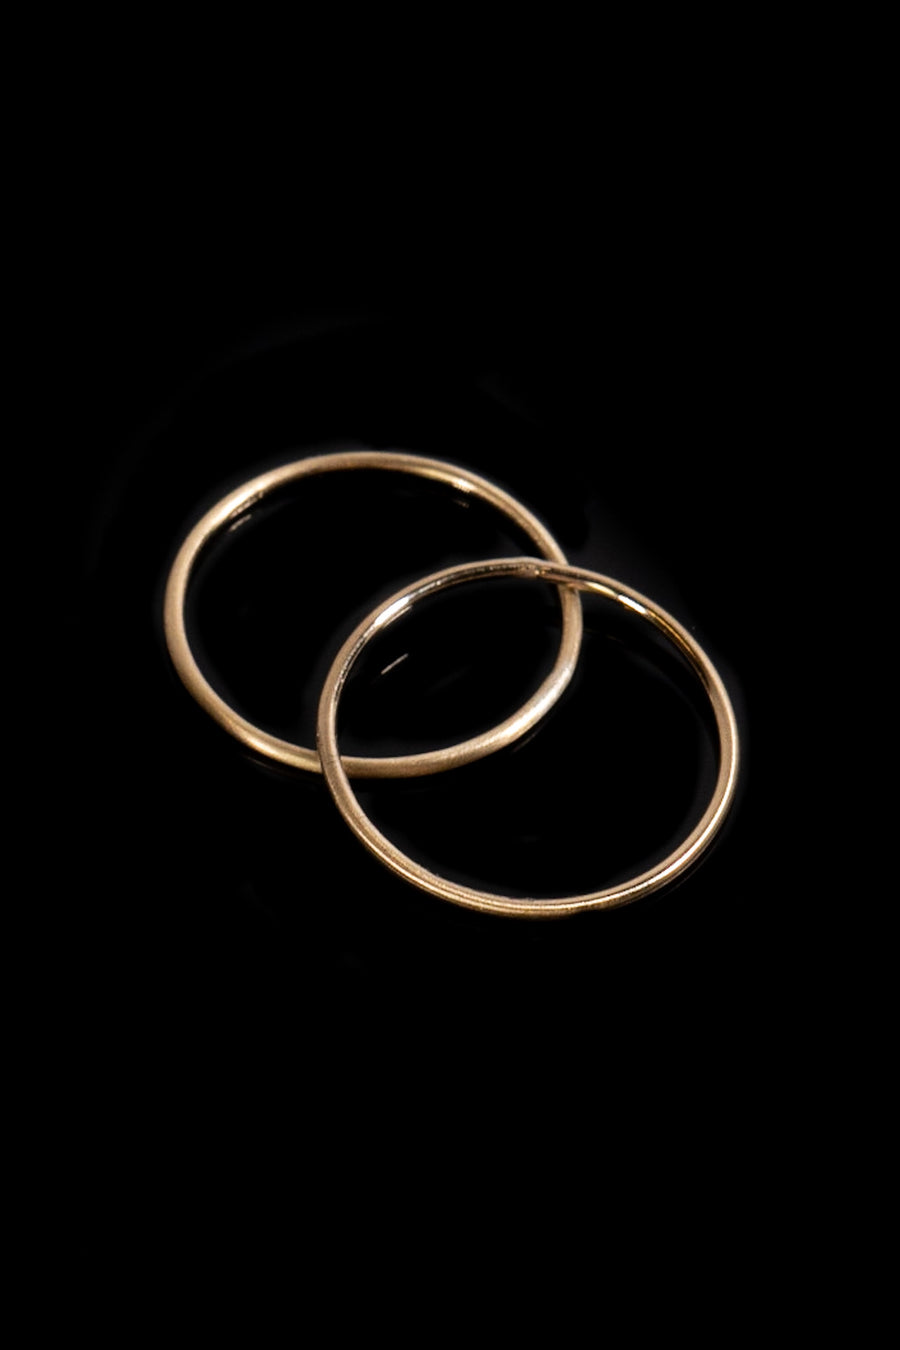 Double 1.5mm 14k Gold Stacking Ring Set size 8 by VK Designs